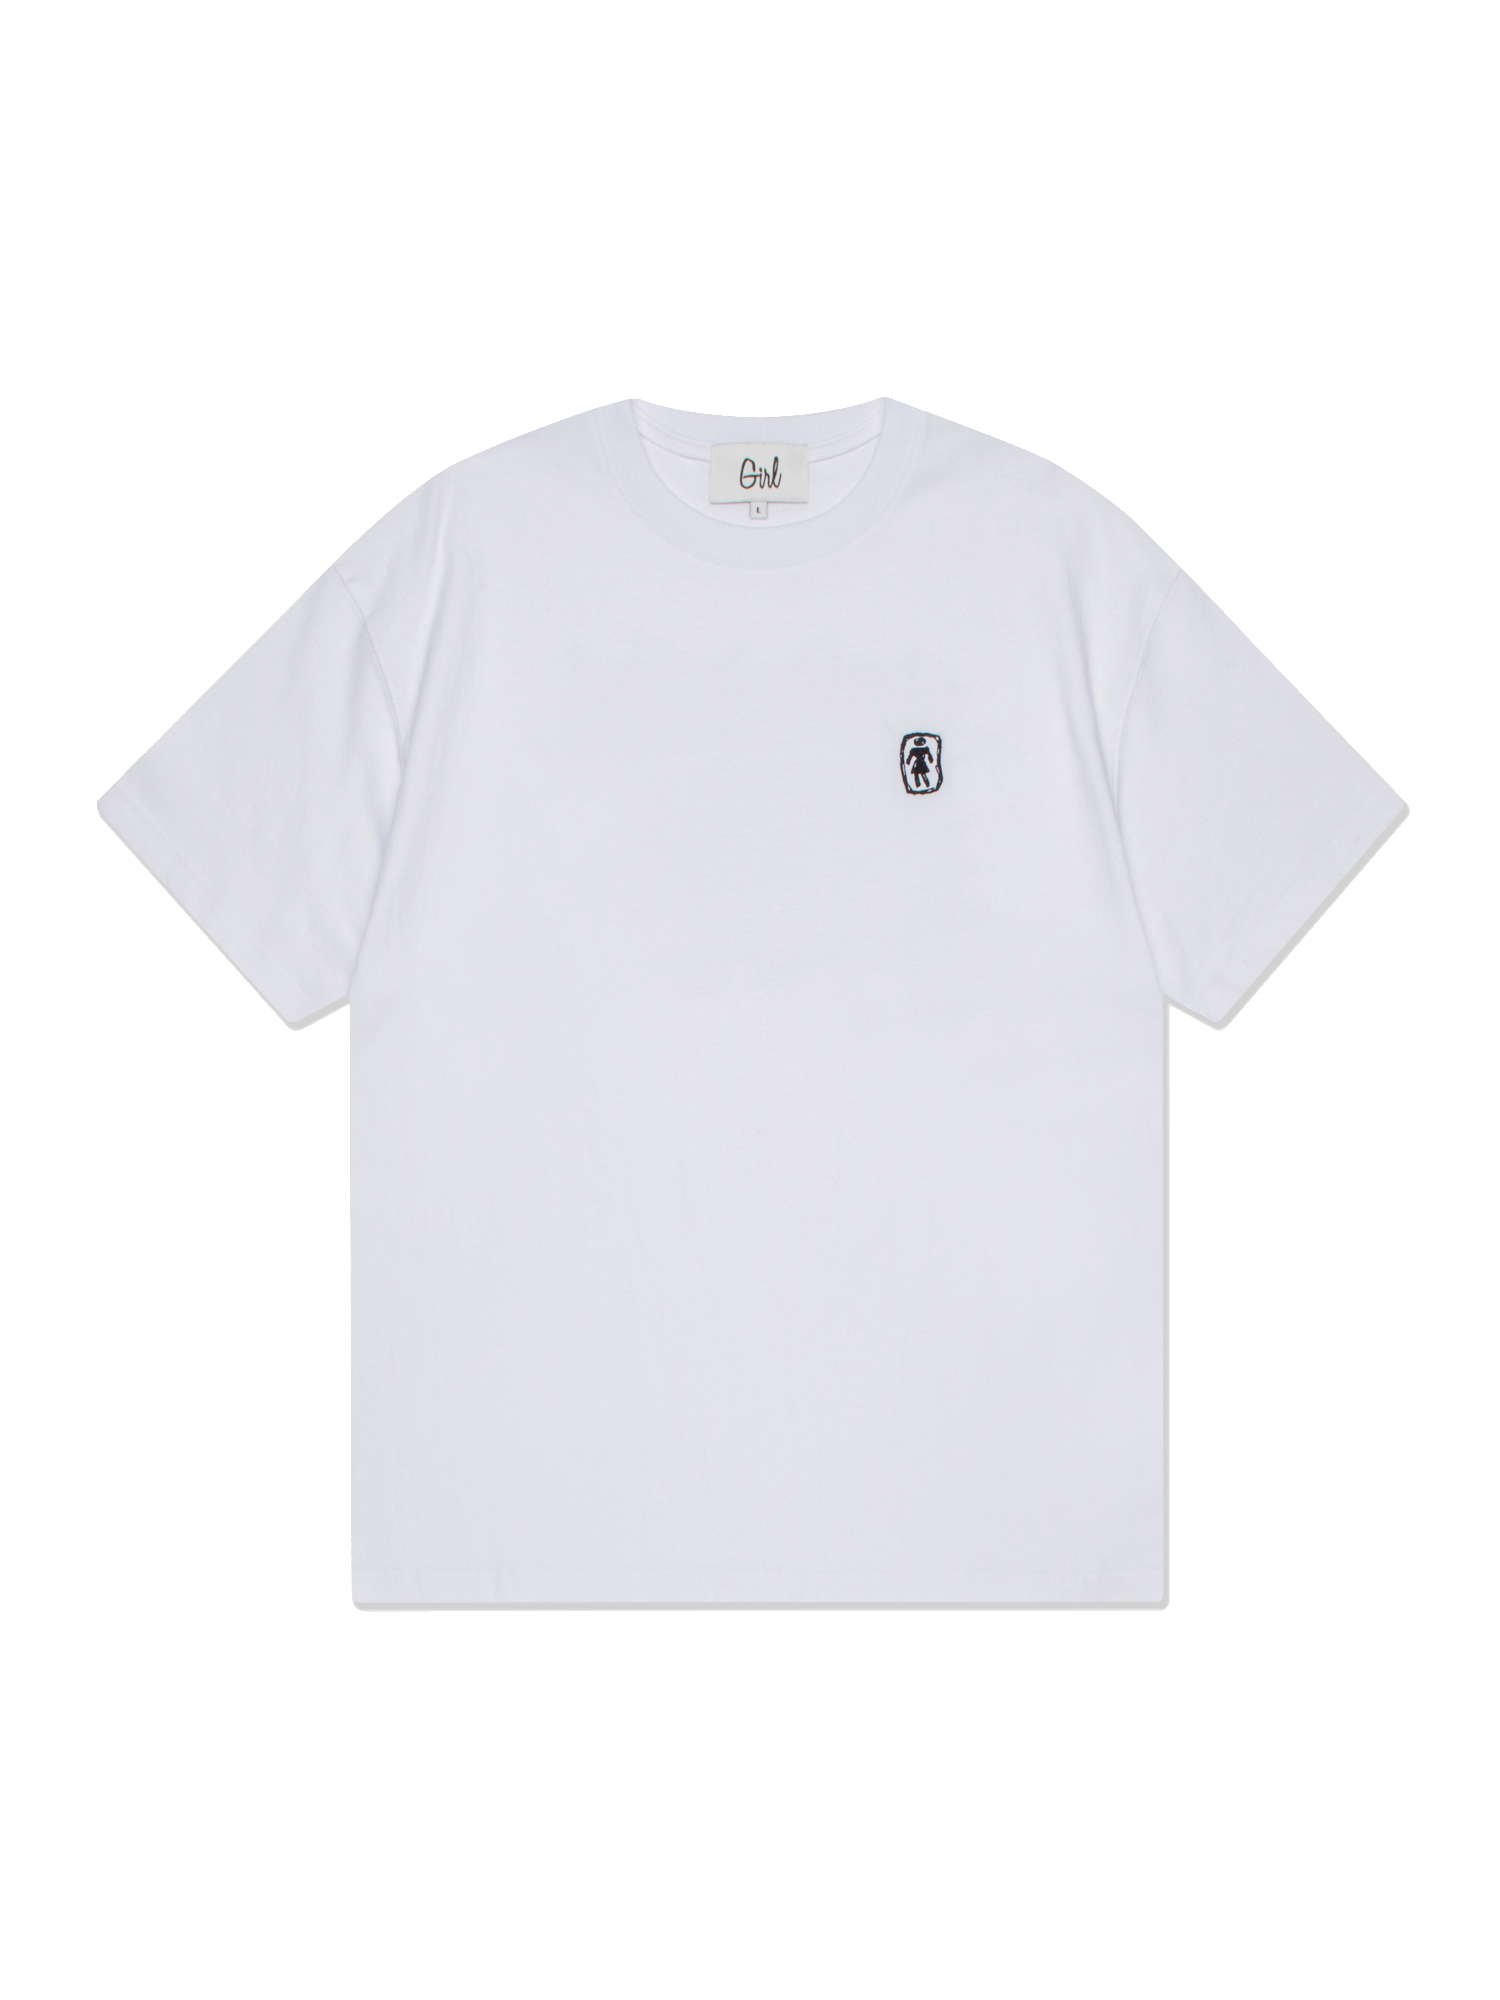 Doodle Graphic Tee - White